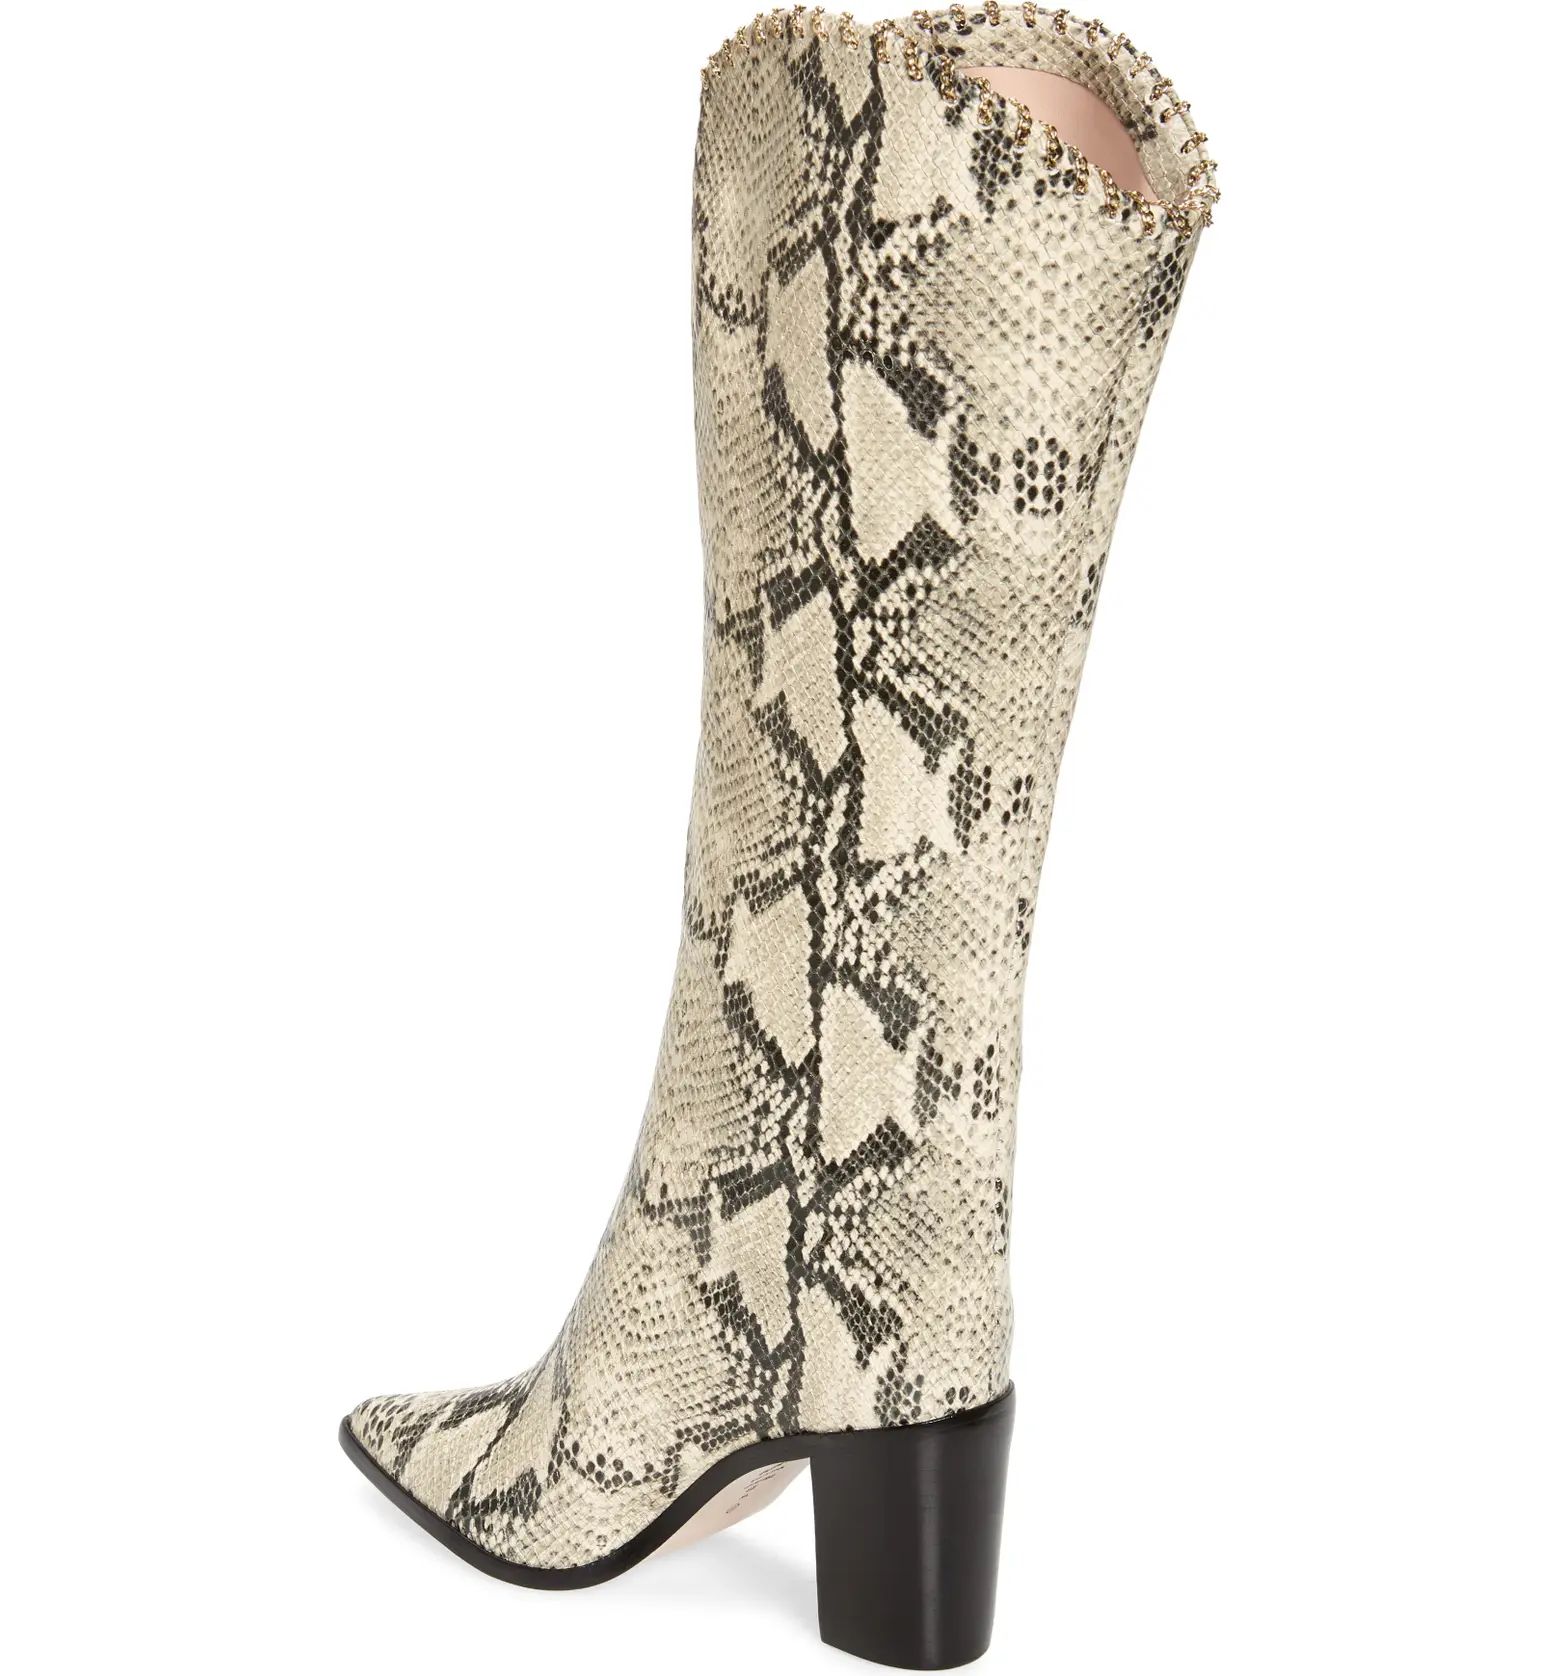 Valy Knee High Boot | Nordstrom Rack